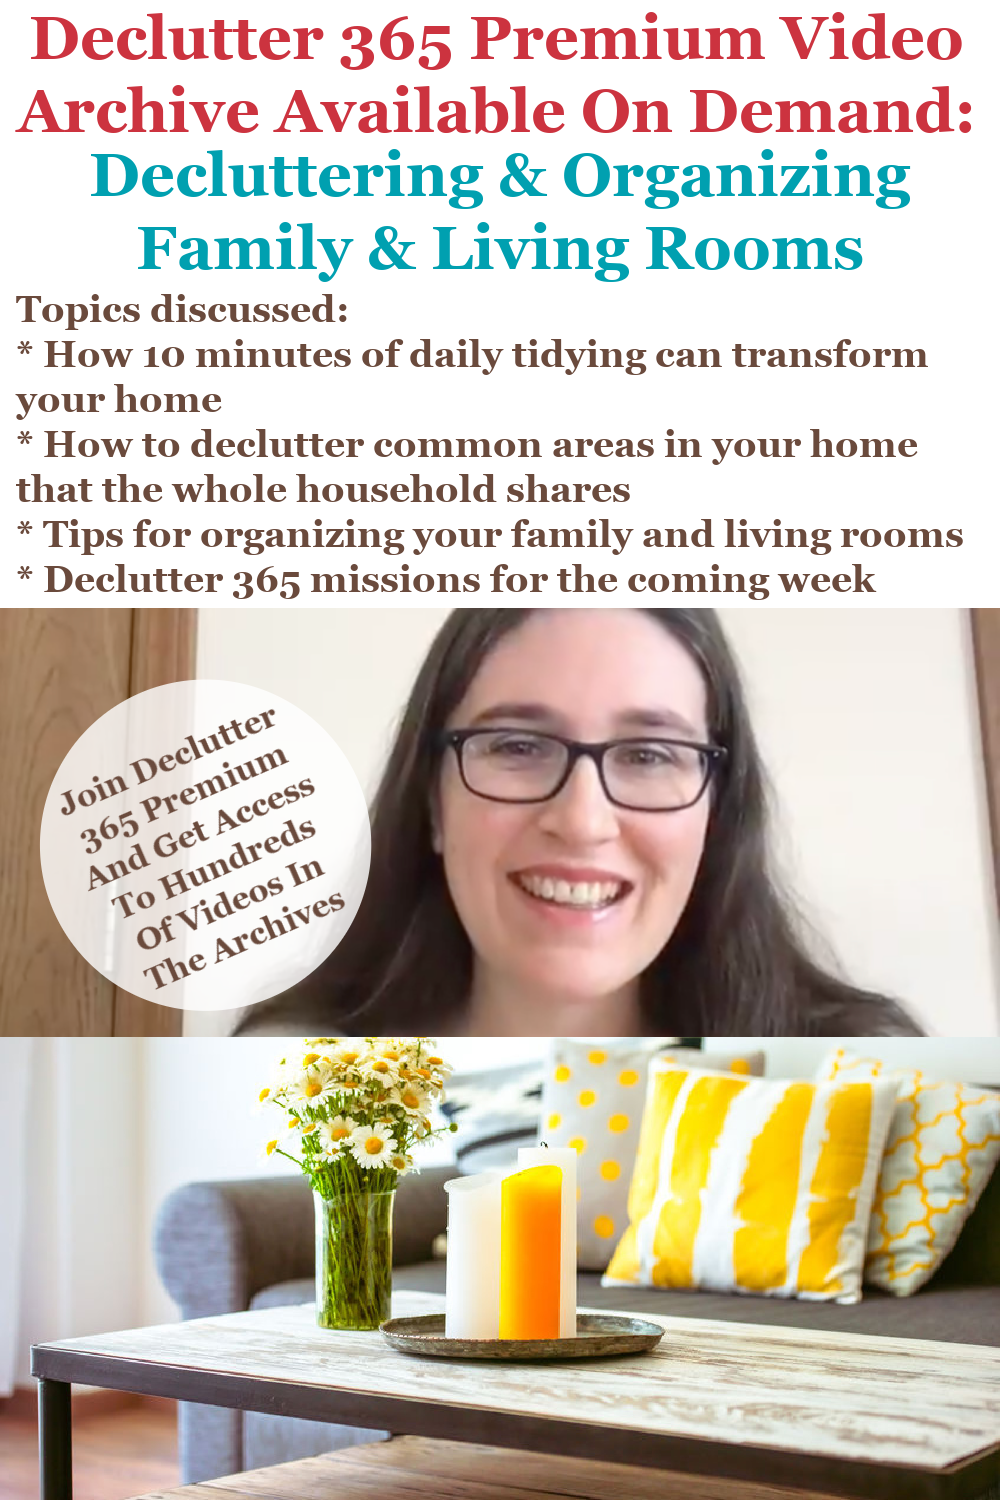 Declutter 365 Premium video archive available on demand all about decluttering and organizing your family and living room, on Home Storage Solutions 101